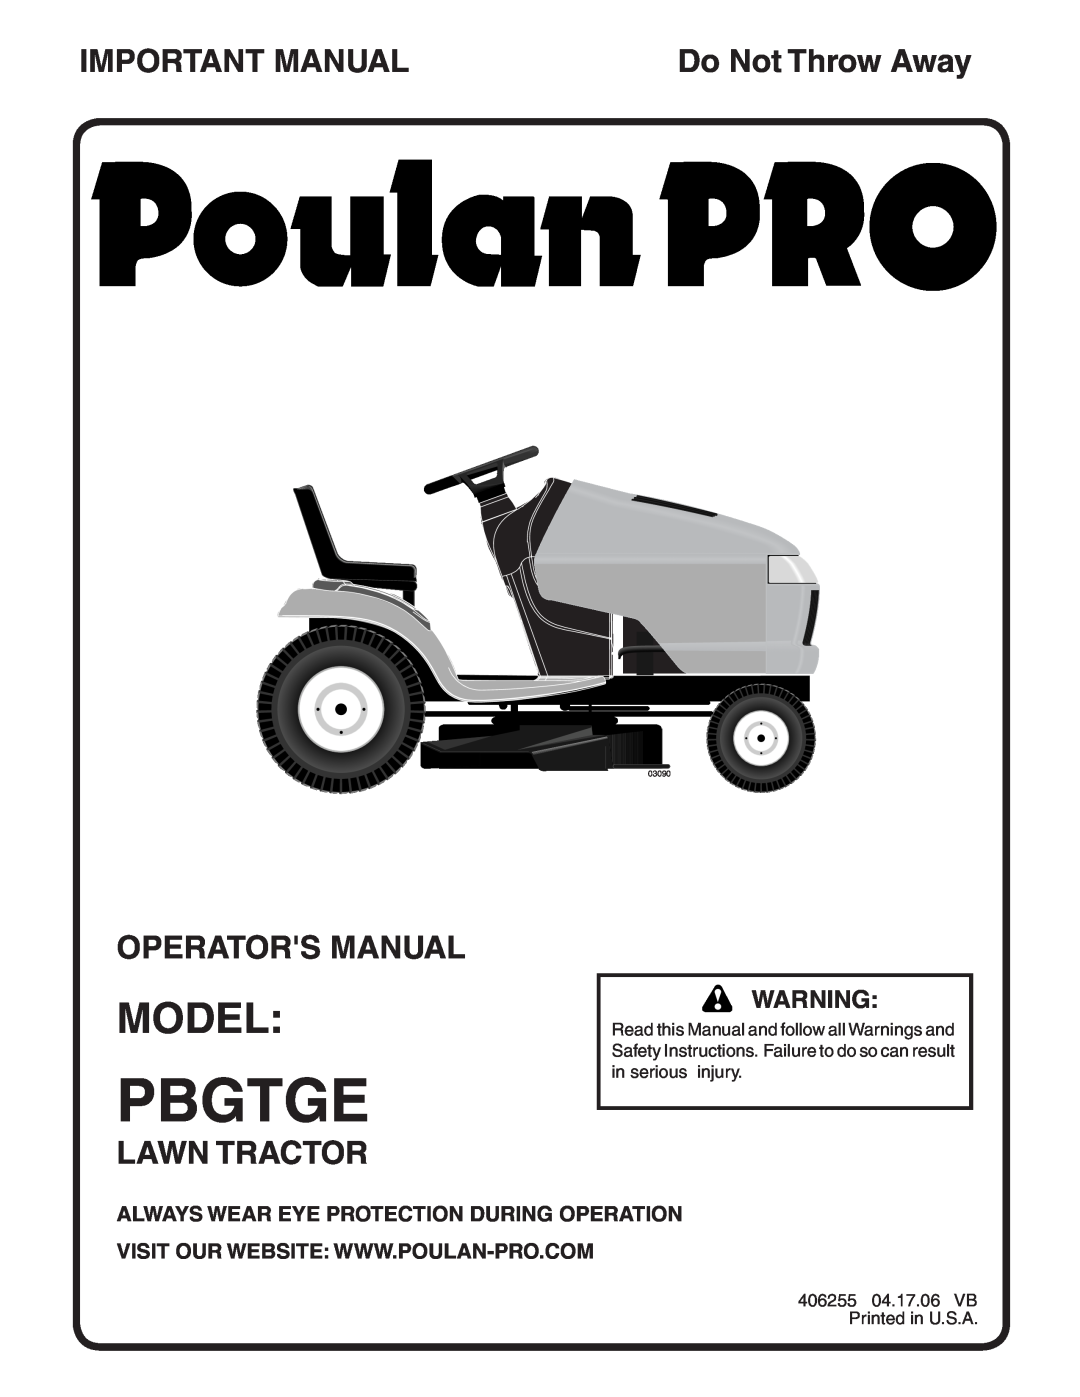 Poulan PBGTGE manual Model, Important Manual, Operators Manual, Lawn Tractor, Always Wear Eye Protection During Operation 